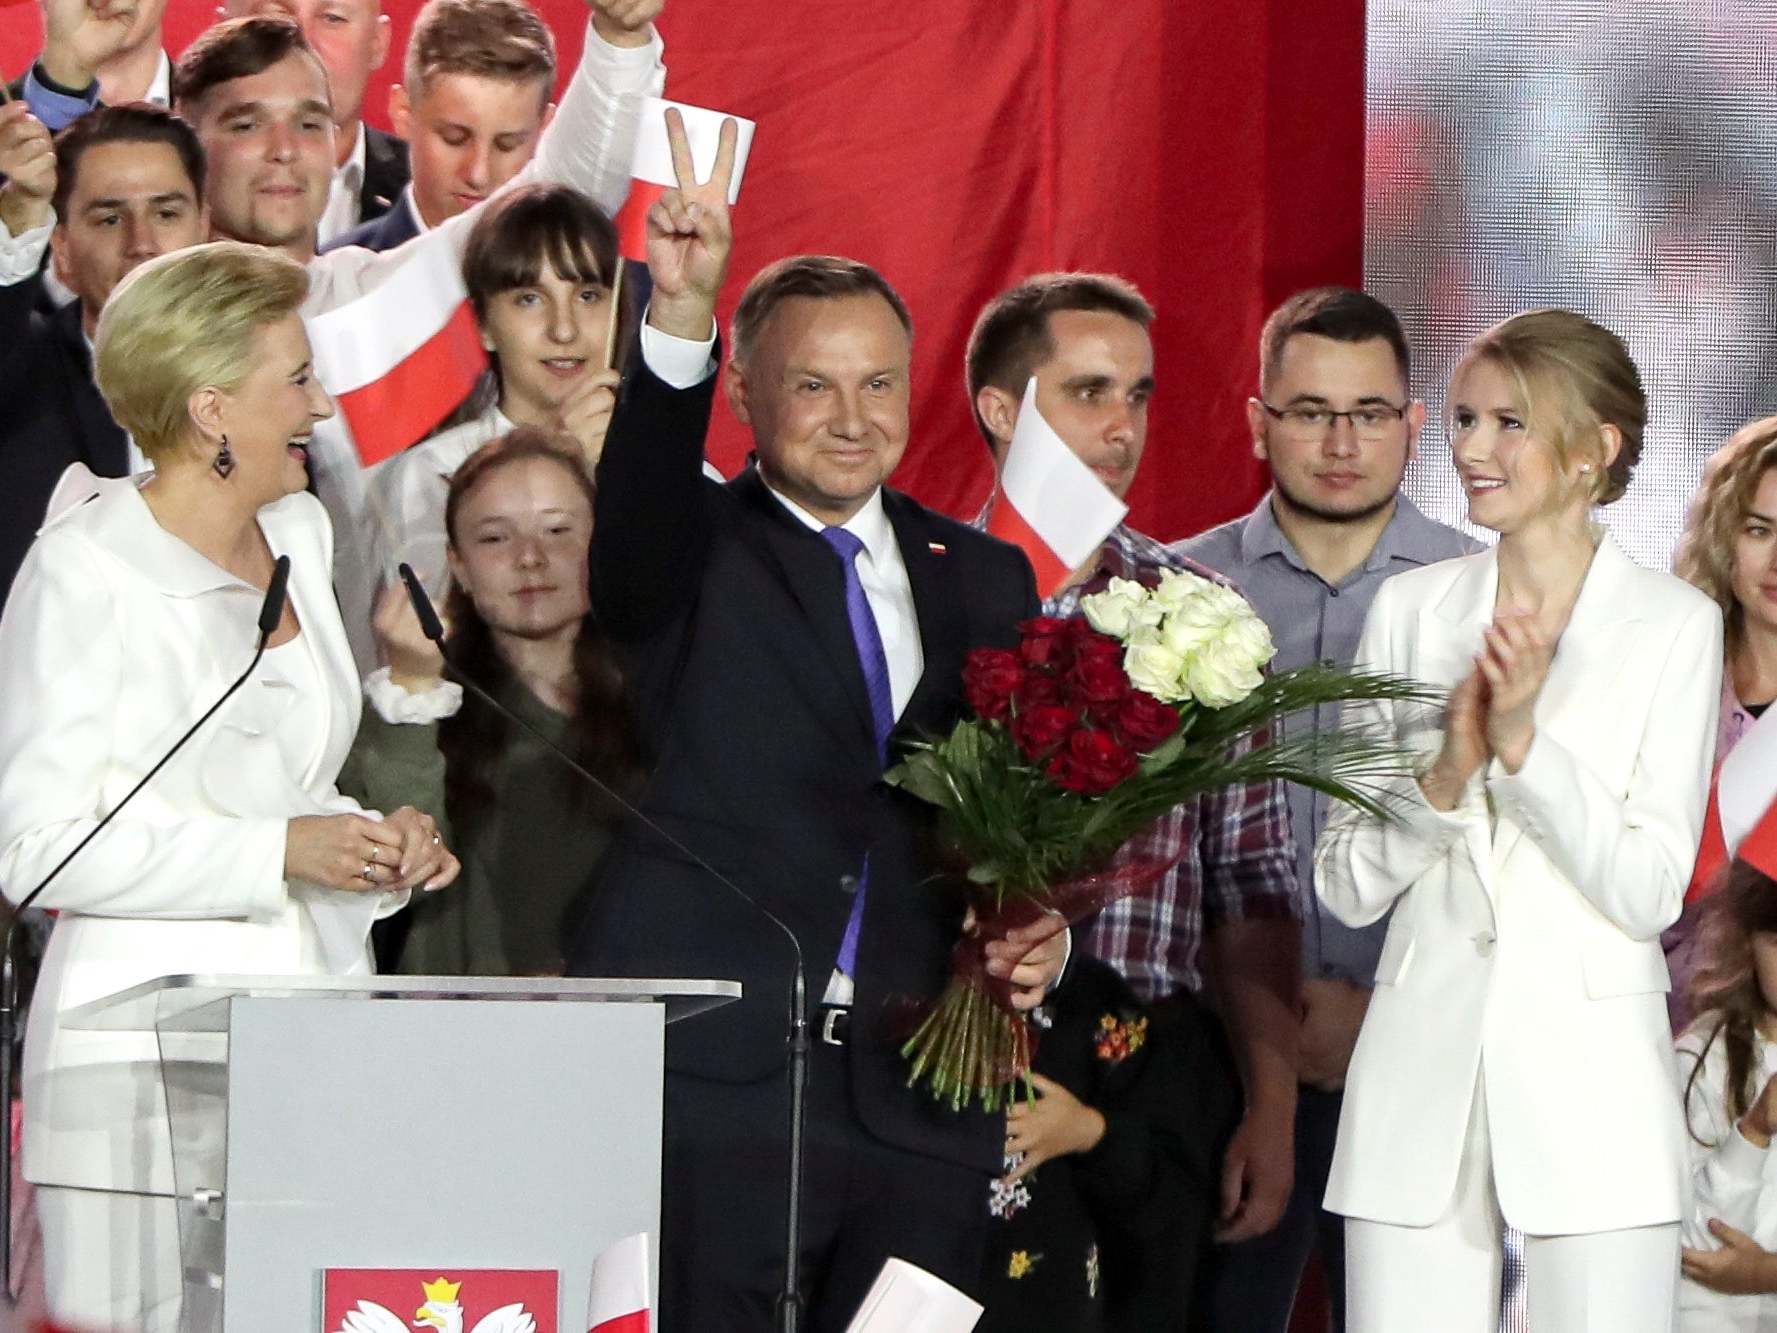 Exit polls gave Andrzej Duda a narrow lead in the presidential election